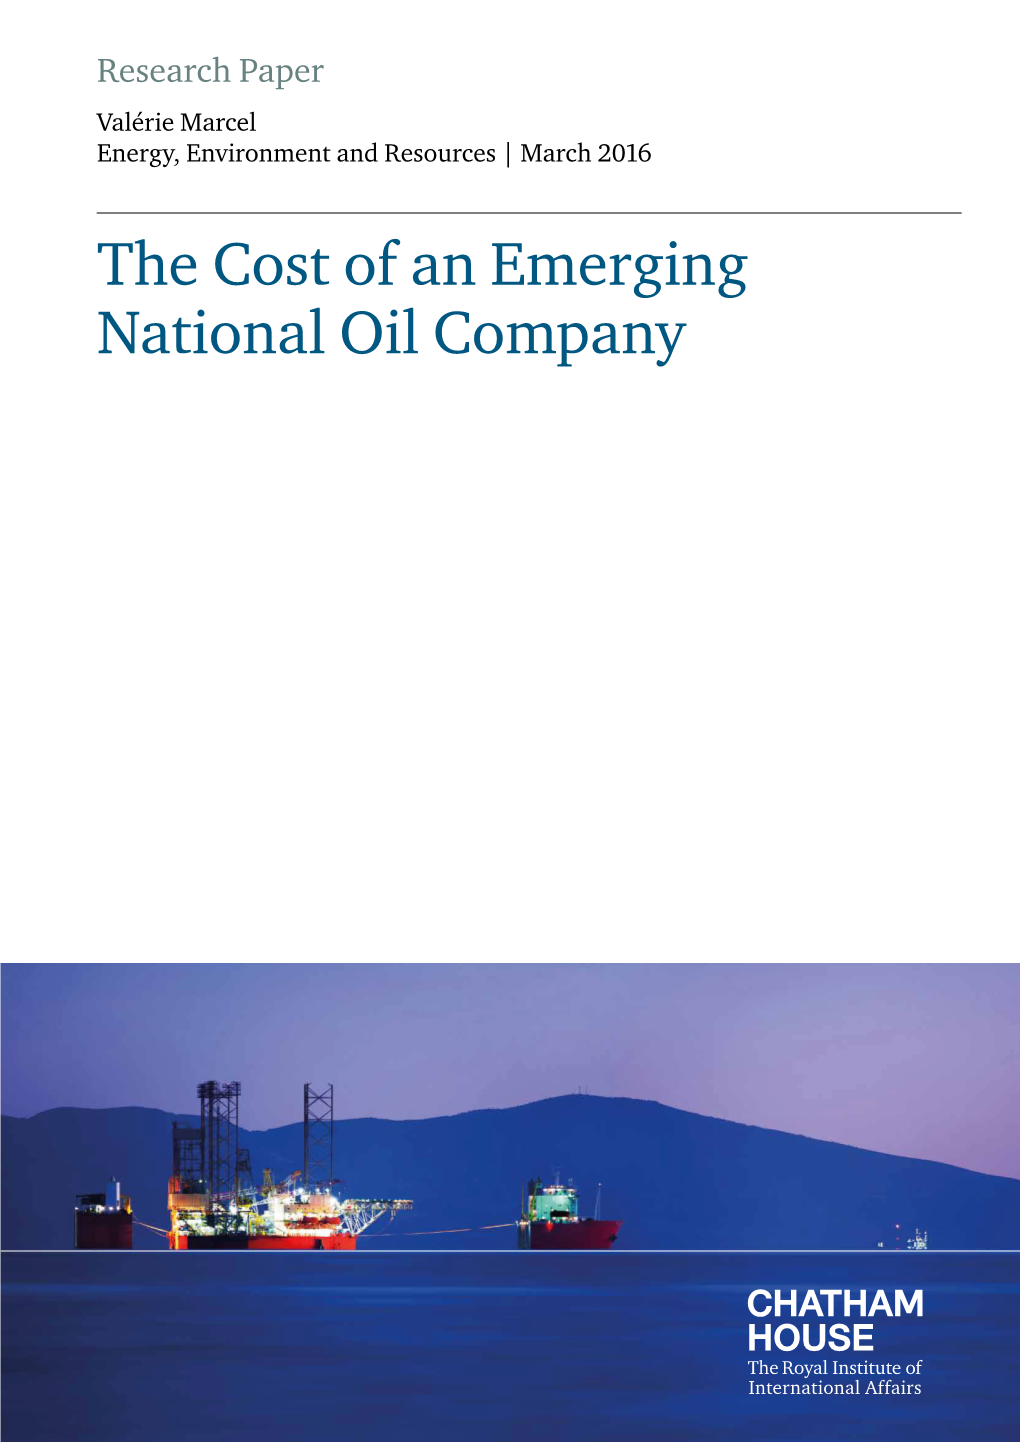 The Cost of an Emerging National Oil Company Contents